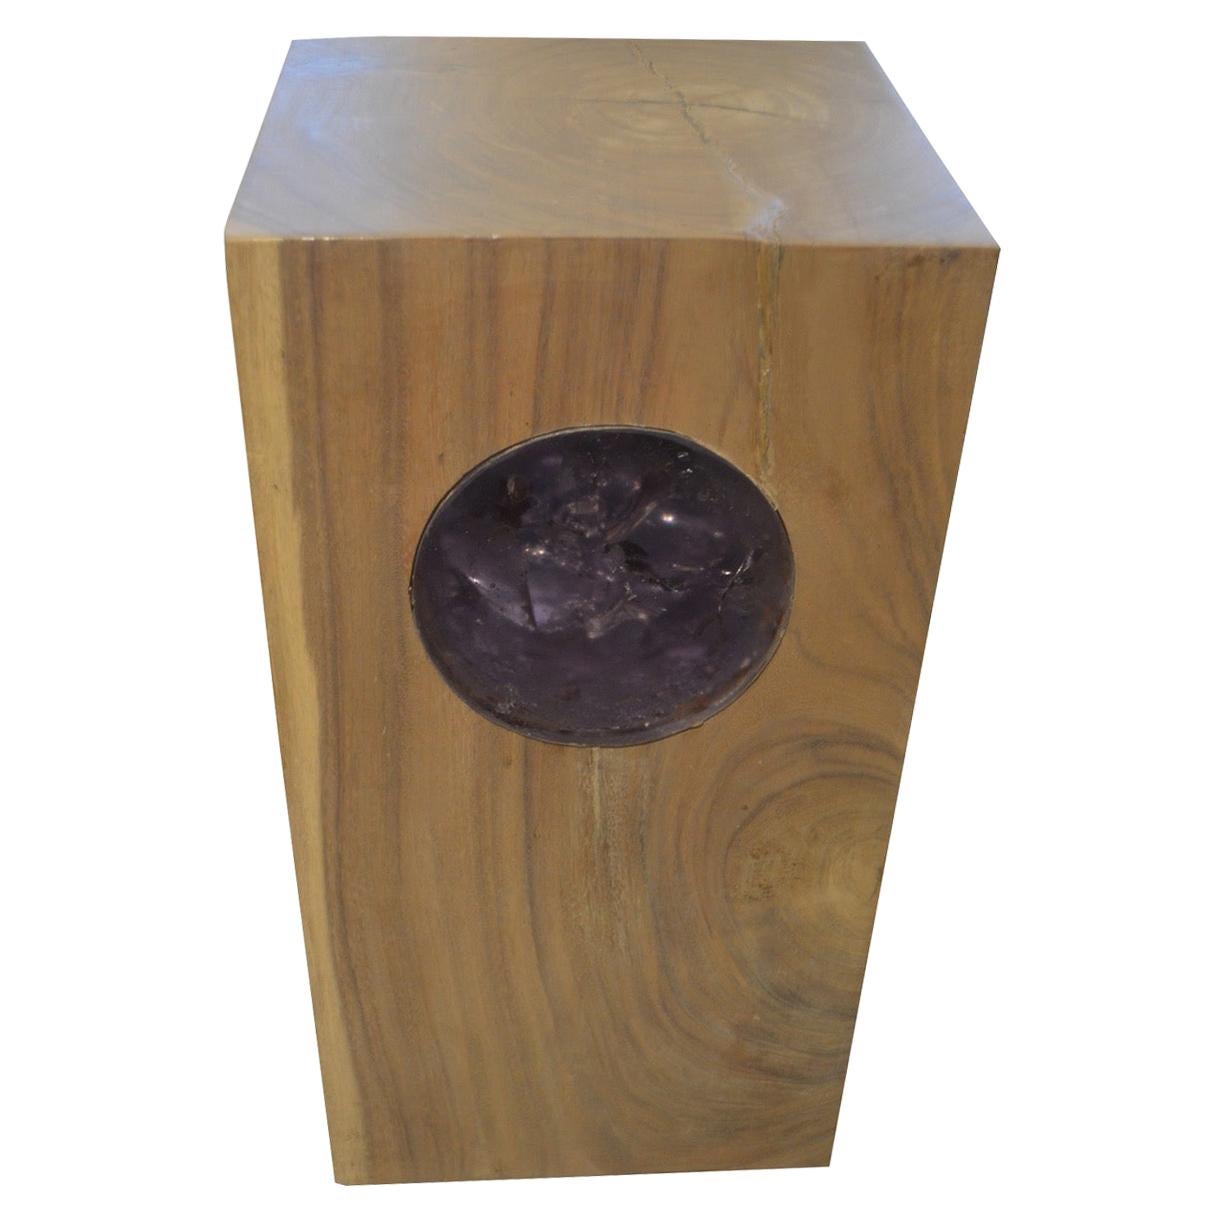 Andrianna Shamaris St. Barts Suar Wood Pedestal with Resin For Sale